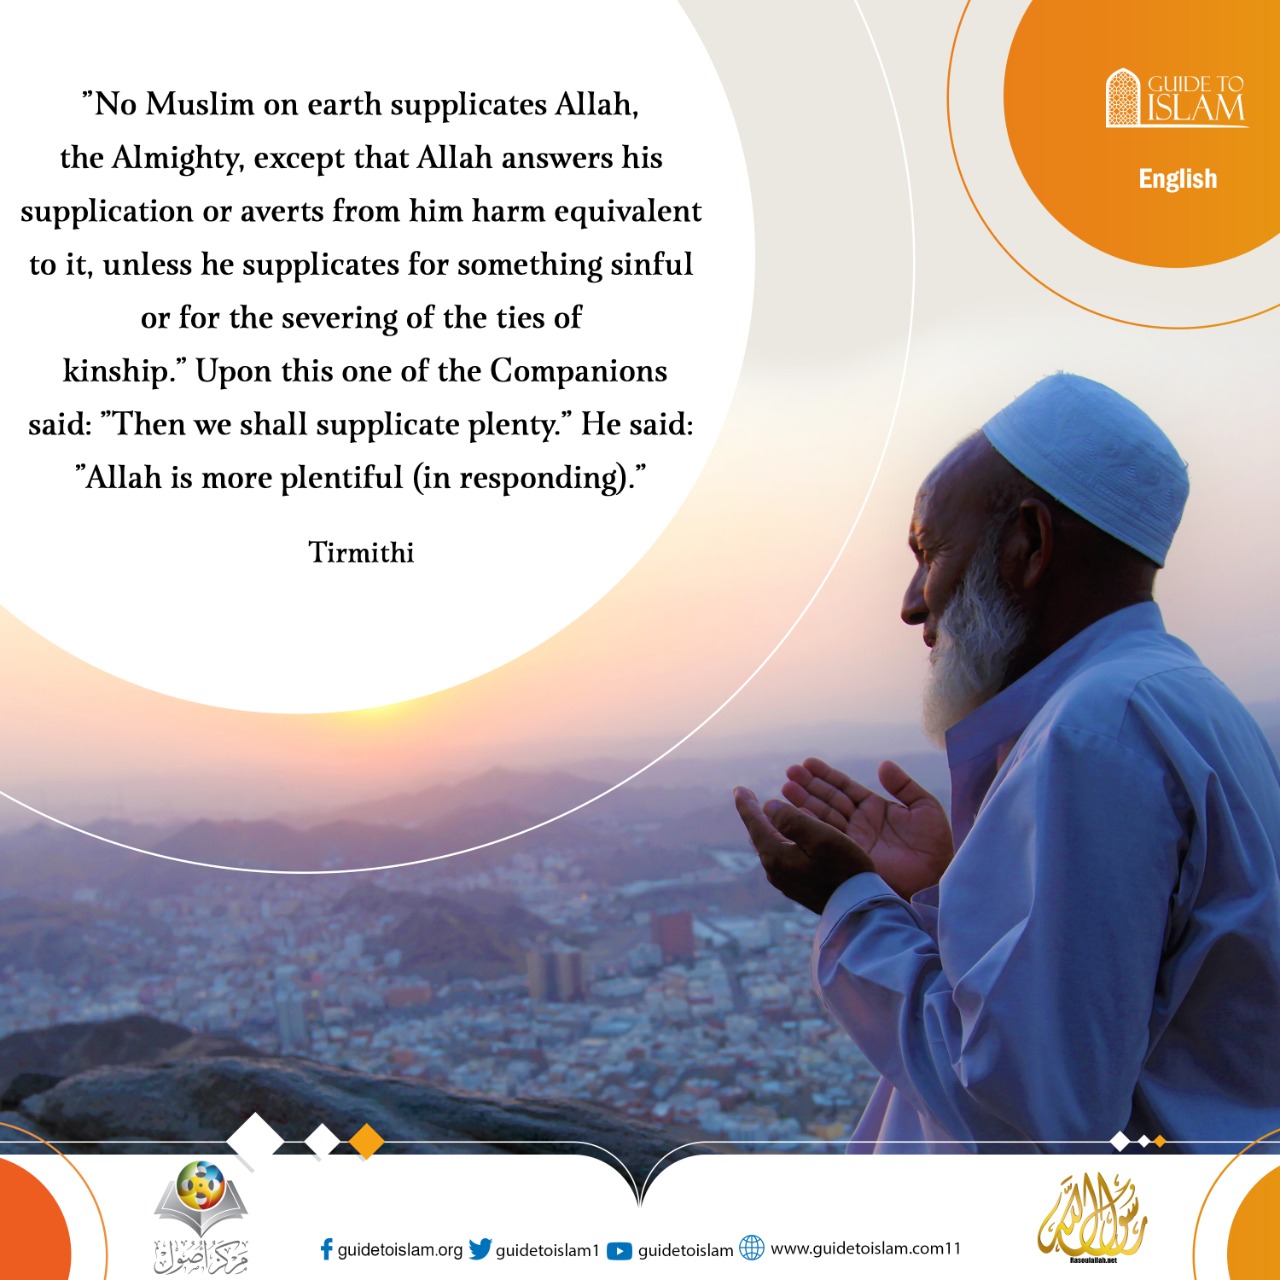 Allah answers our Good supplication in three ways